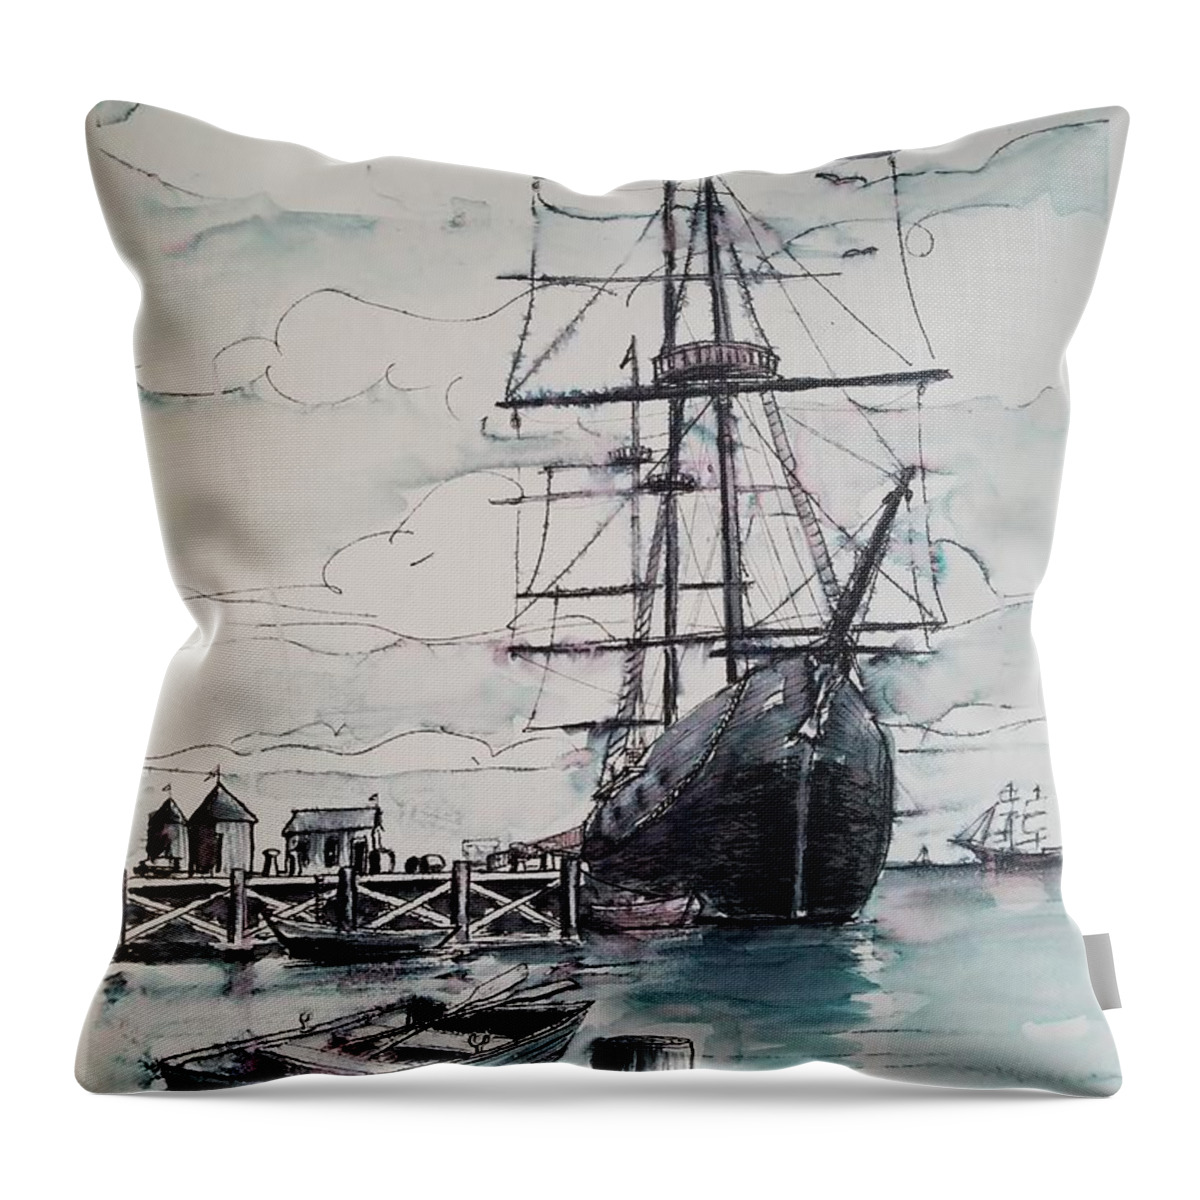 Sail Throw Pillow featuring the drawing Sailing Vessel Pandora by Vic Delnore